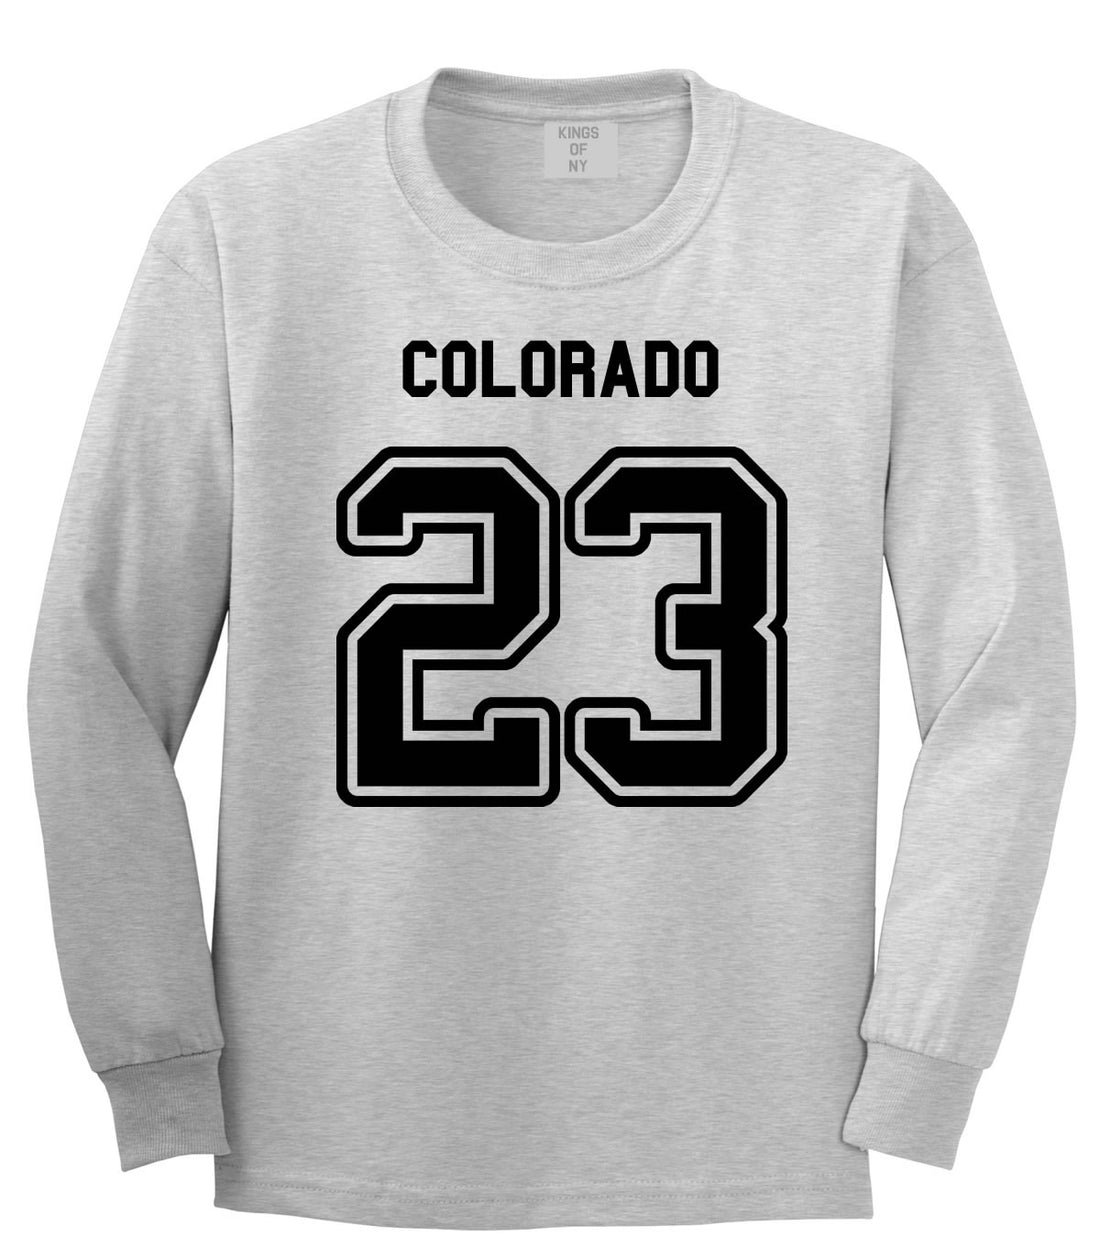 Sport Style Colorado 23 Team State Jersey Long Sleeve T-Shirt By Kings Of NY